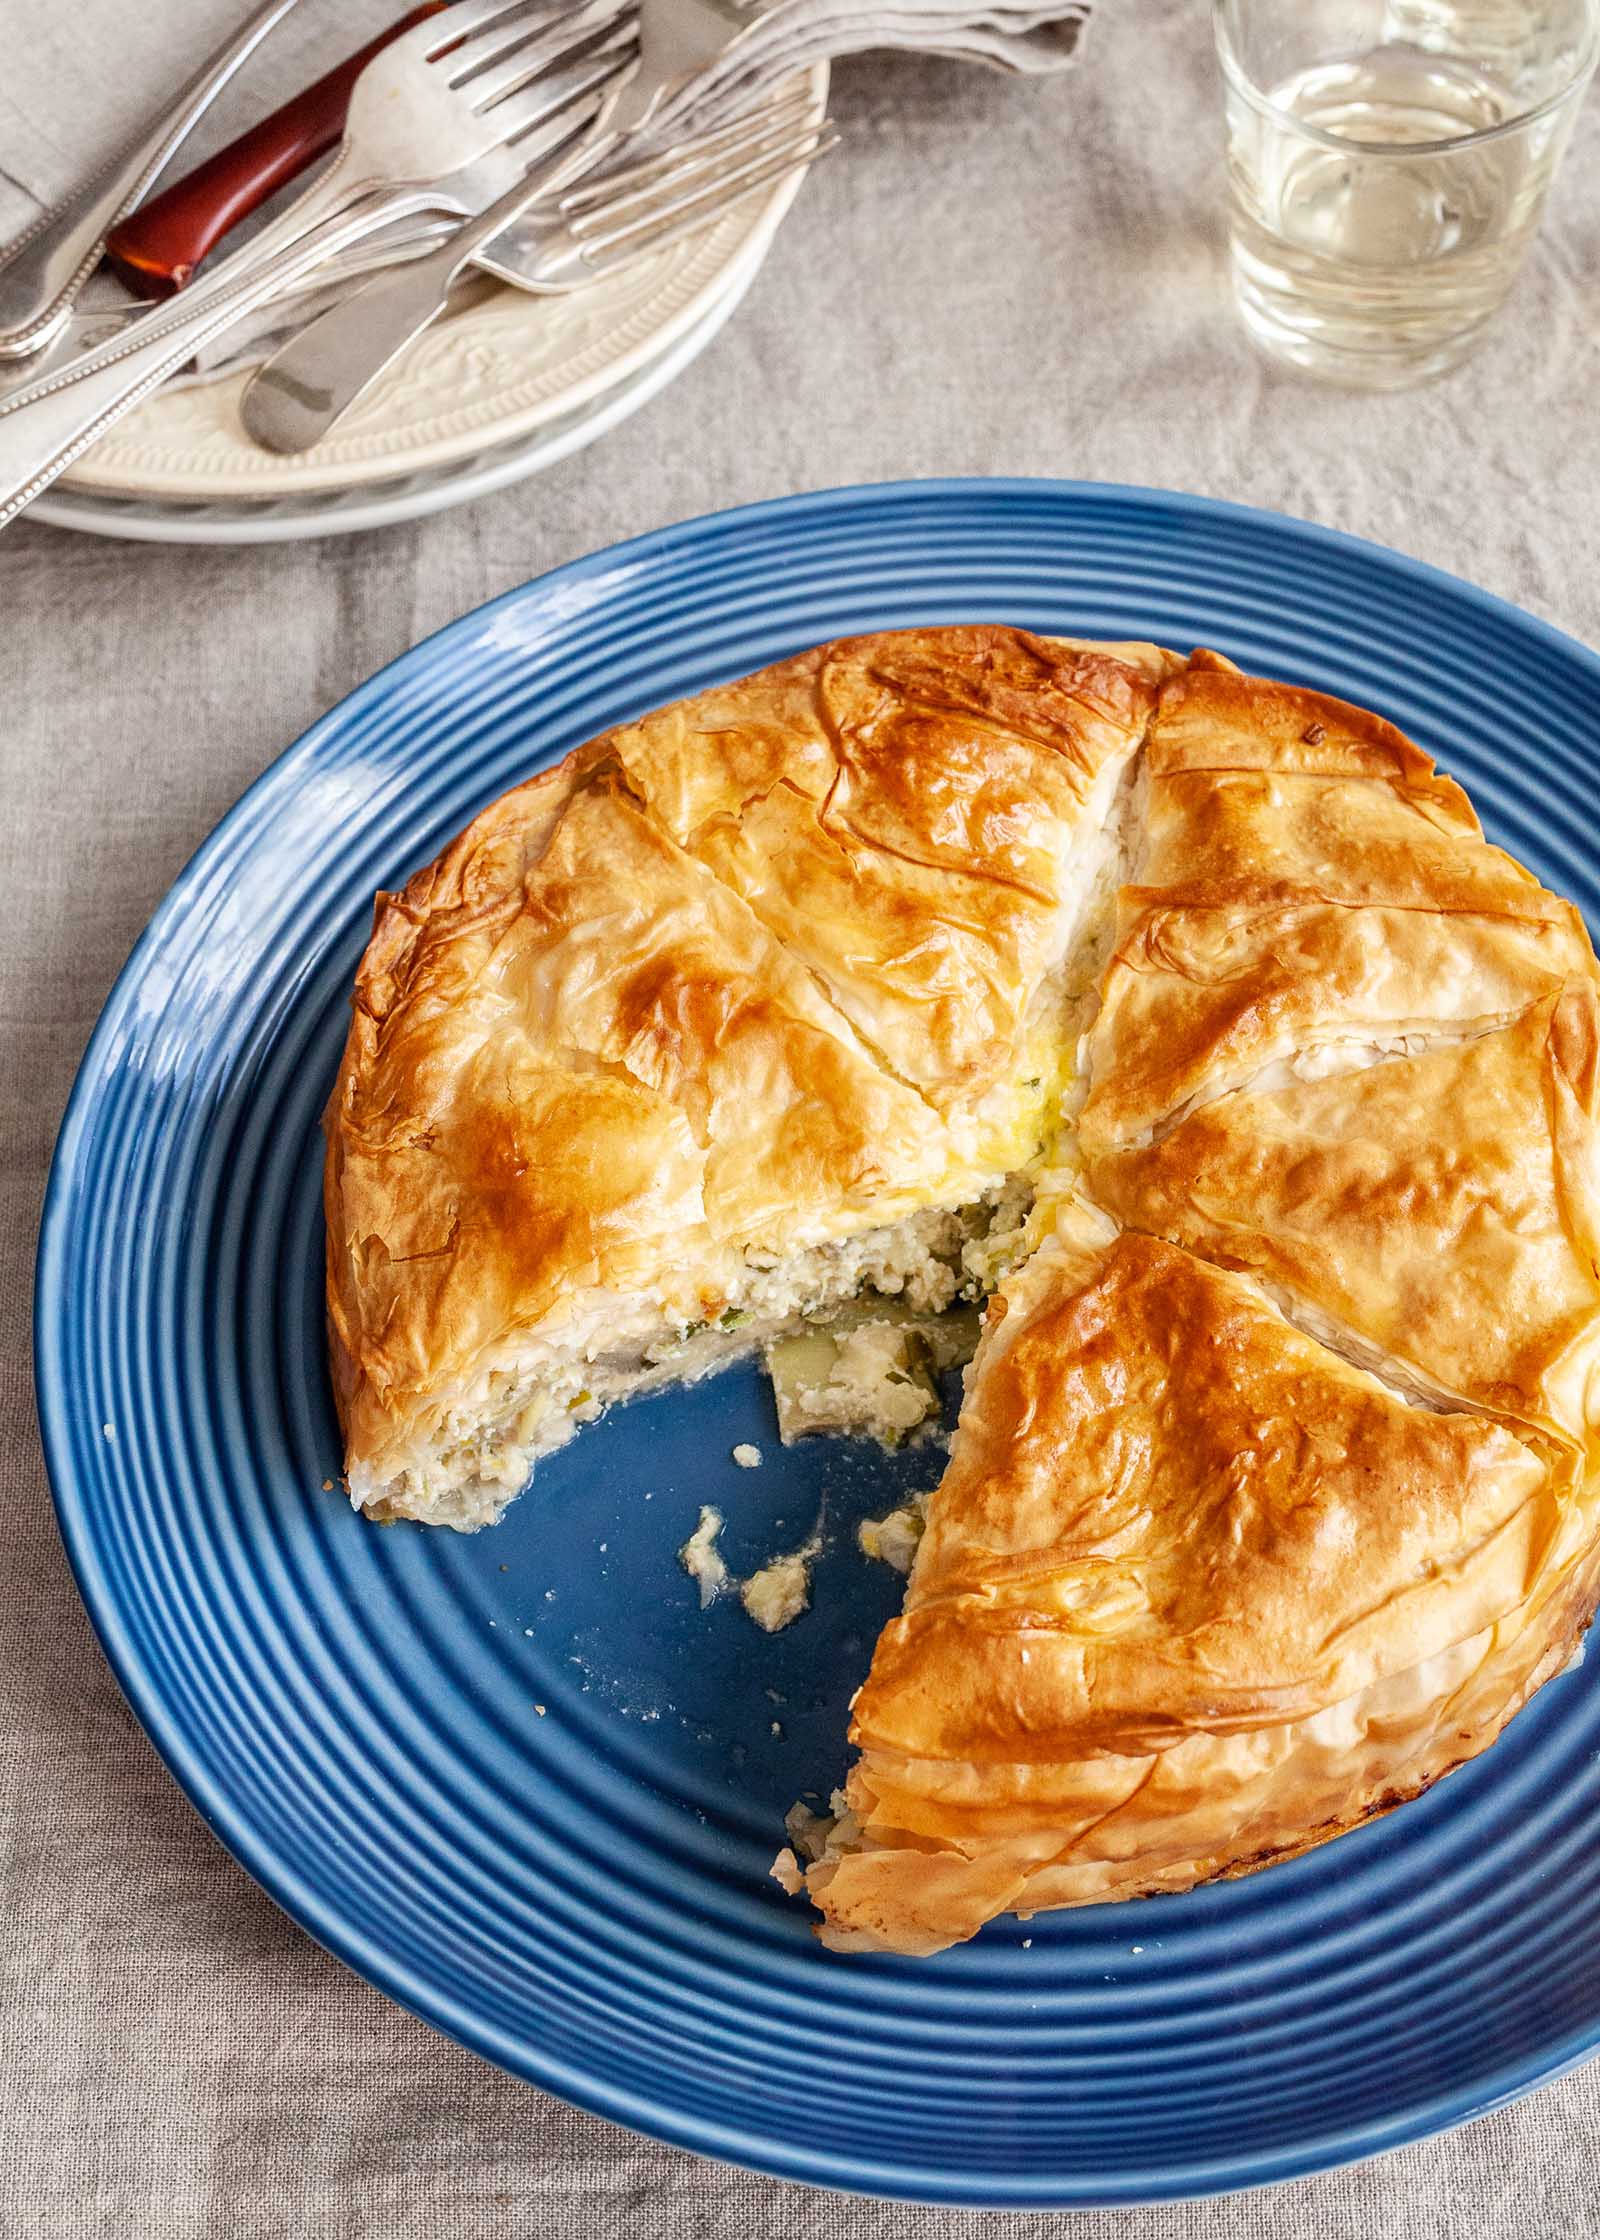 A flaky spring pie is on a blue plate and one slice is missing. The cheesy artichoke filling is visible on the plate. A grey tablecloth is under the plate and a stack of white plates and pile of forks is in the upper left corner. A glass of white wine is in the upper right corner.